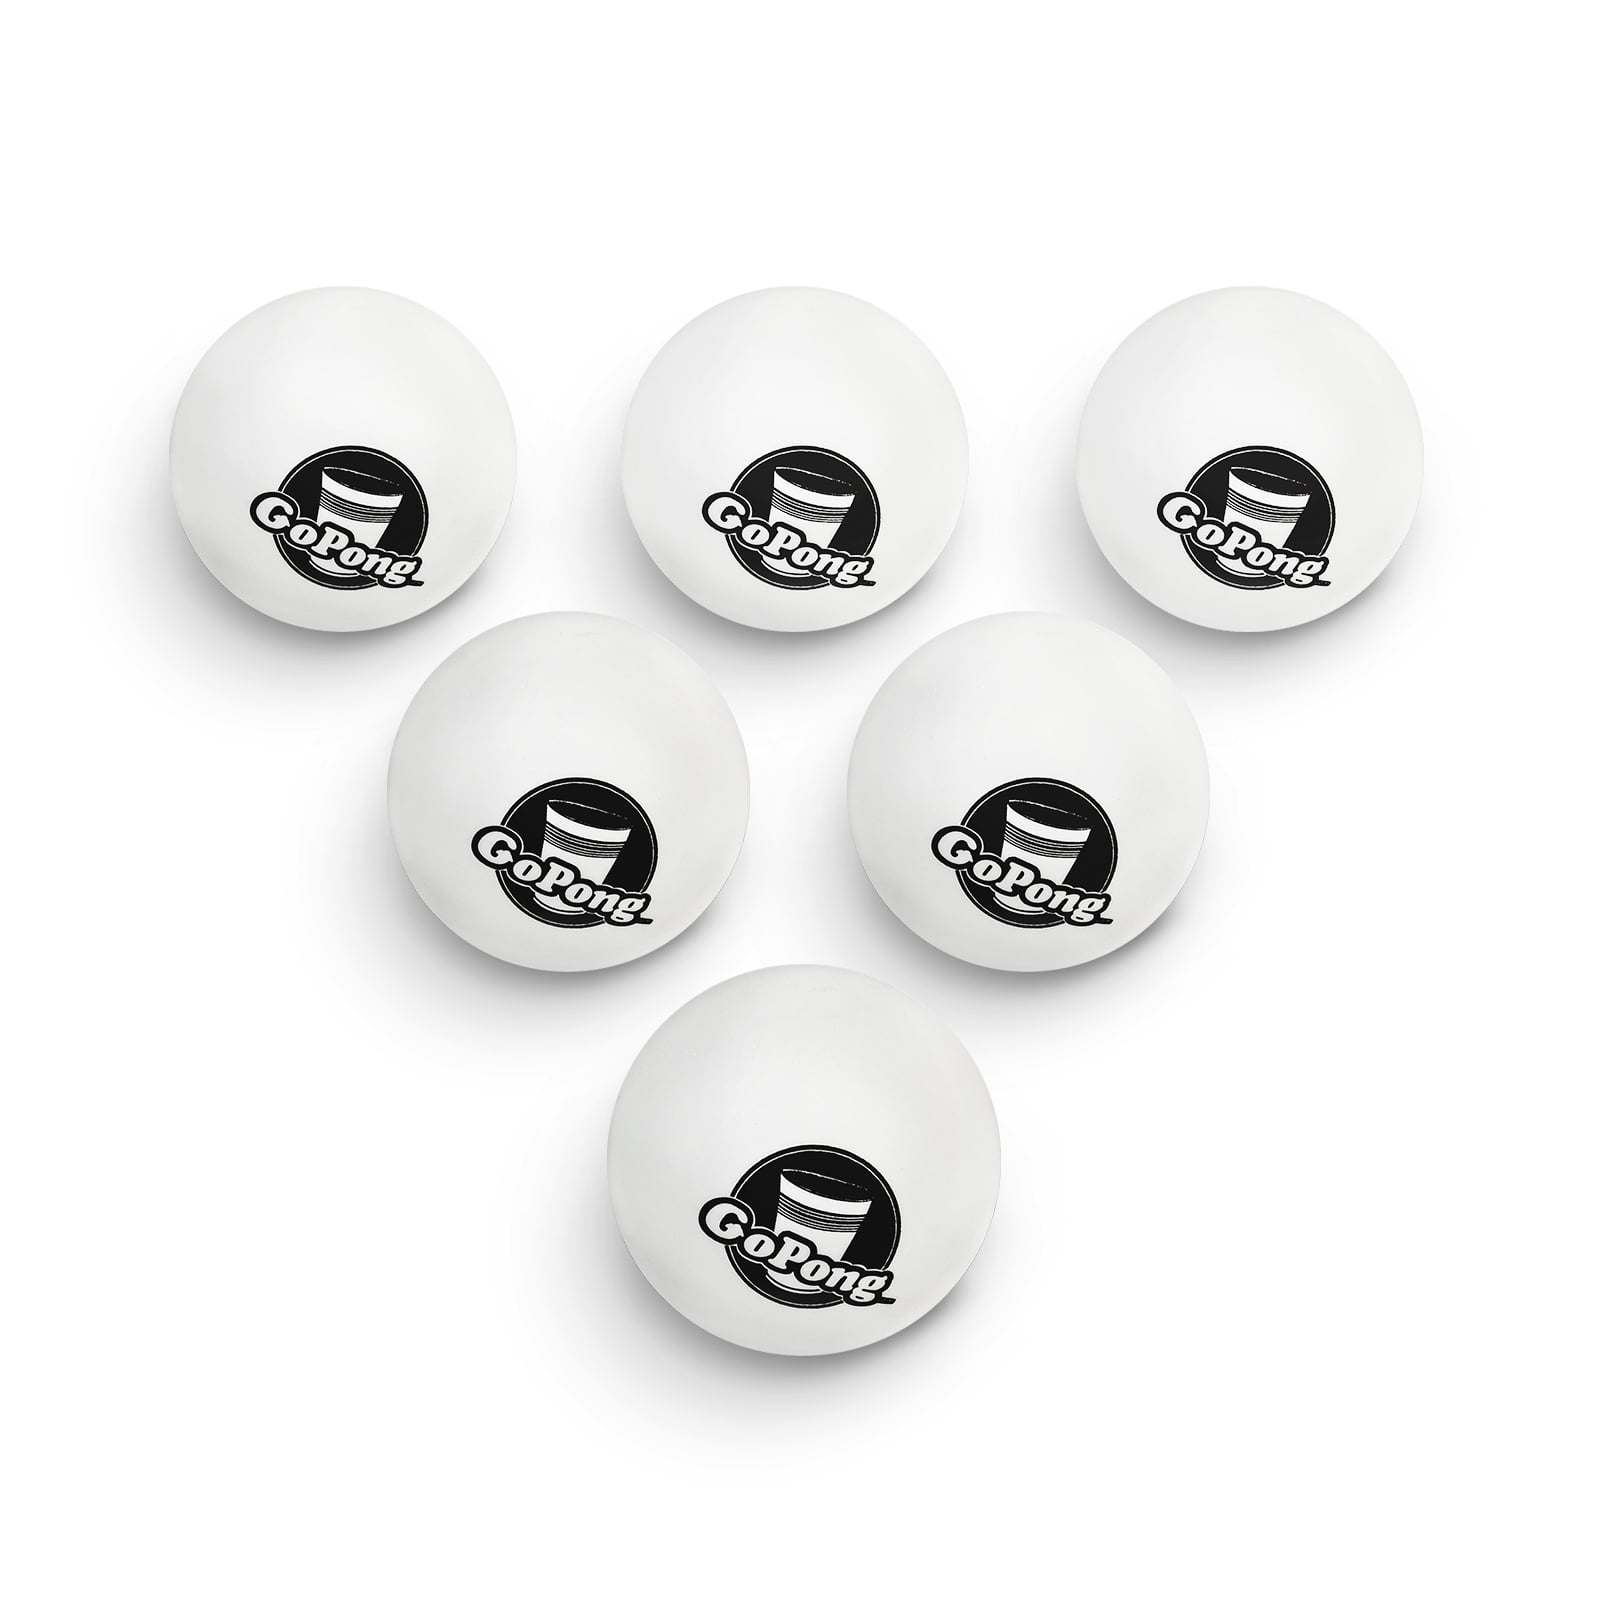 144 40mm Seamless Regulation Size Party Hard Heavy Duty Beer Pong Balls 